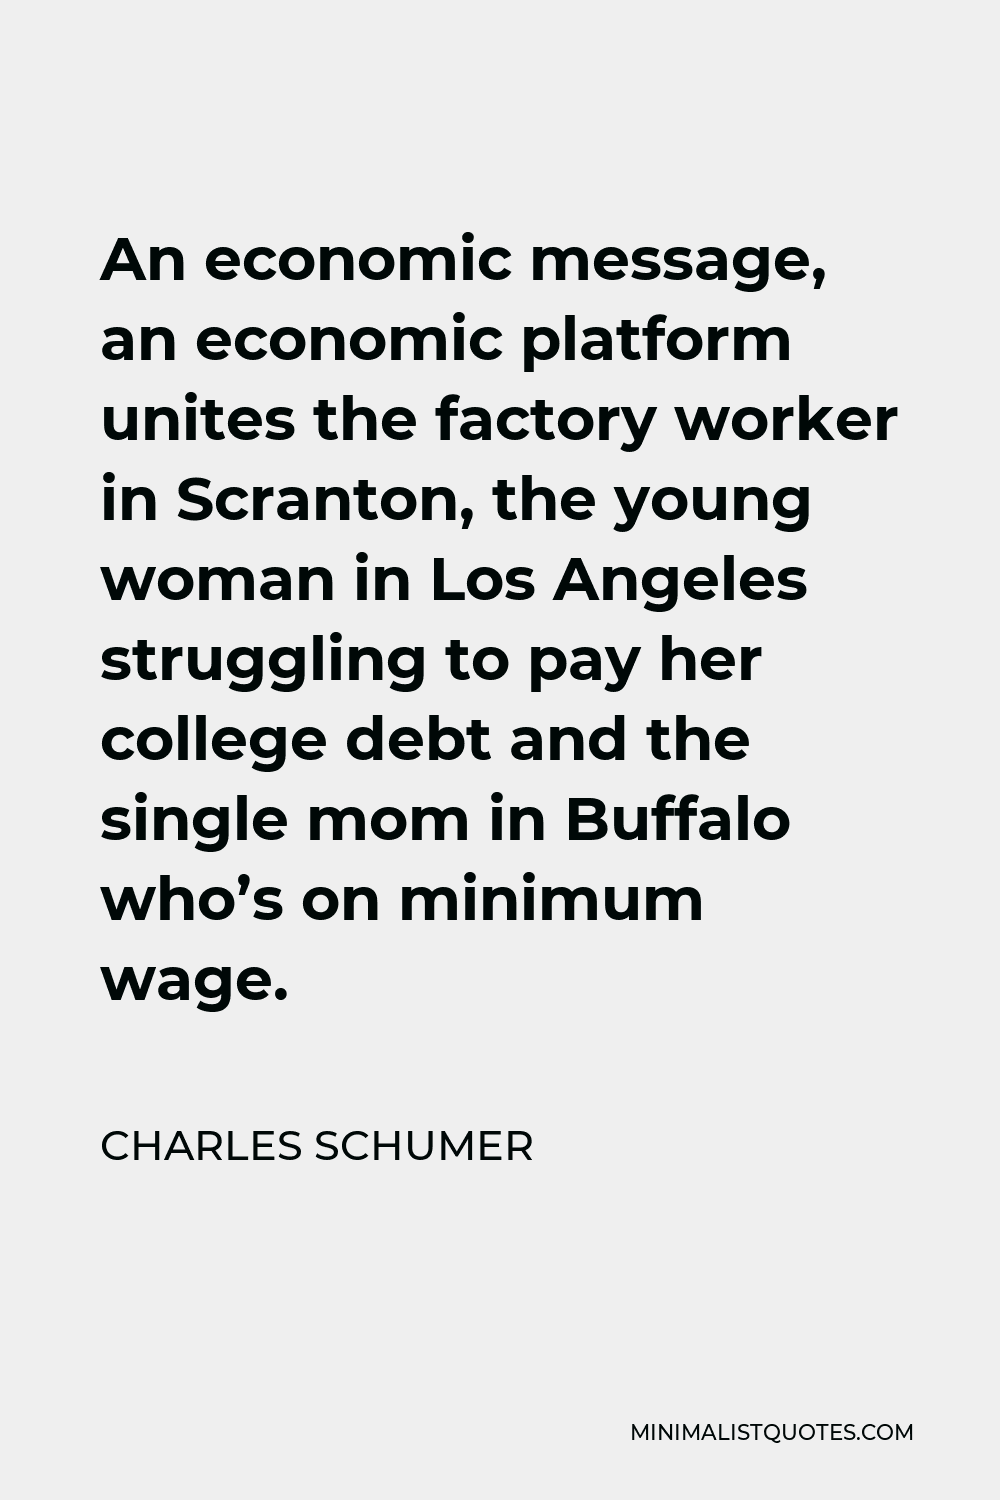 Charles Schumer Quote - An economic message, an economic platform unites the factory worker in Scranton, the young woman in Los Angeles struggling to pay her college debt and the single mom in Buffalo who’s on minimum wage.